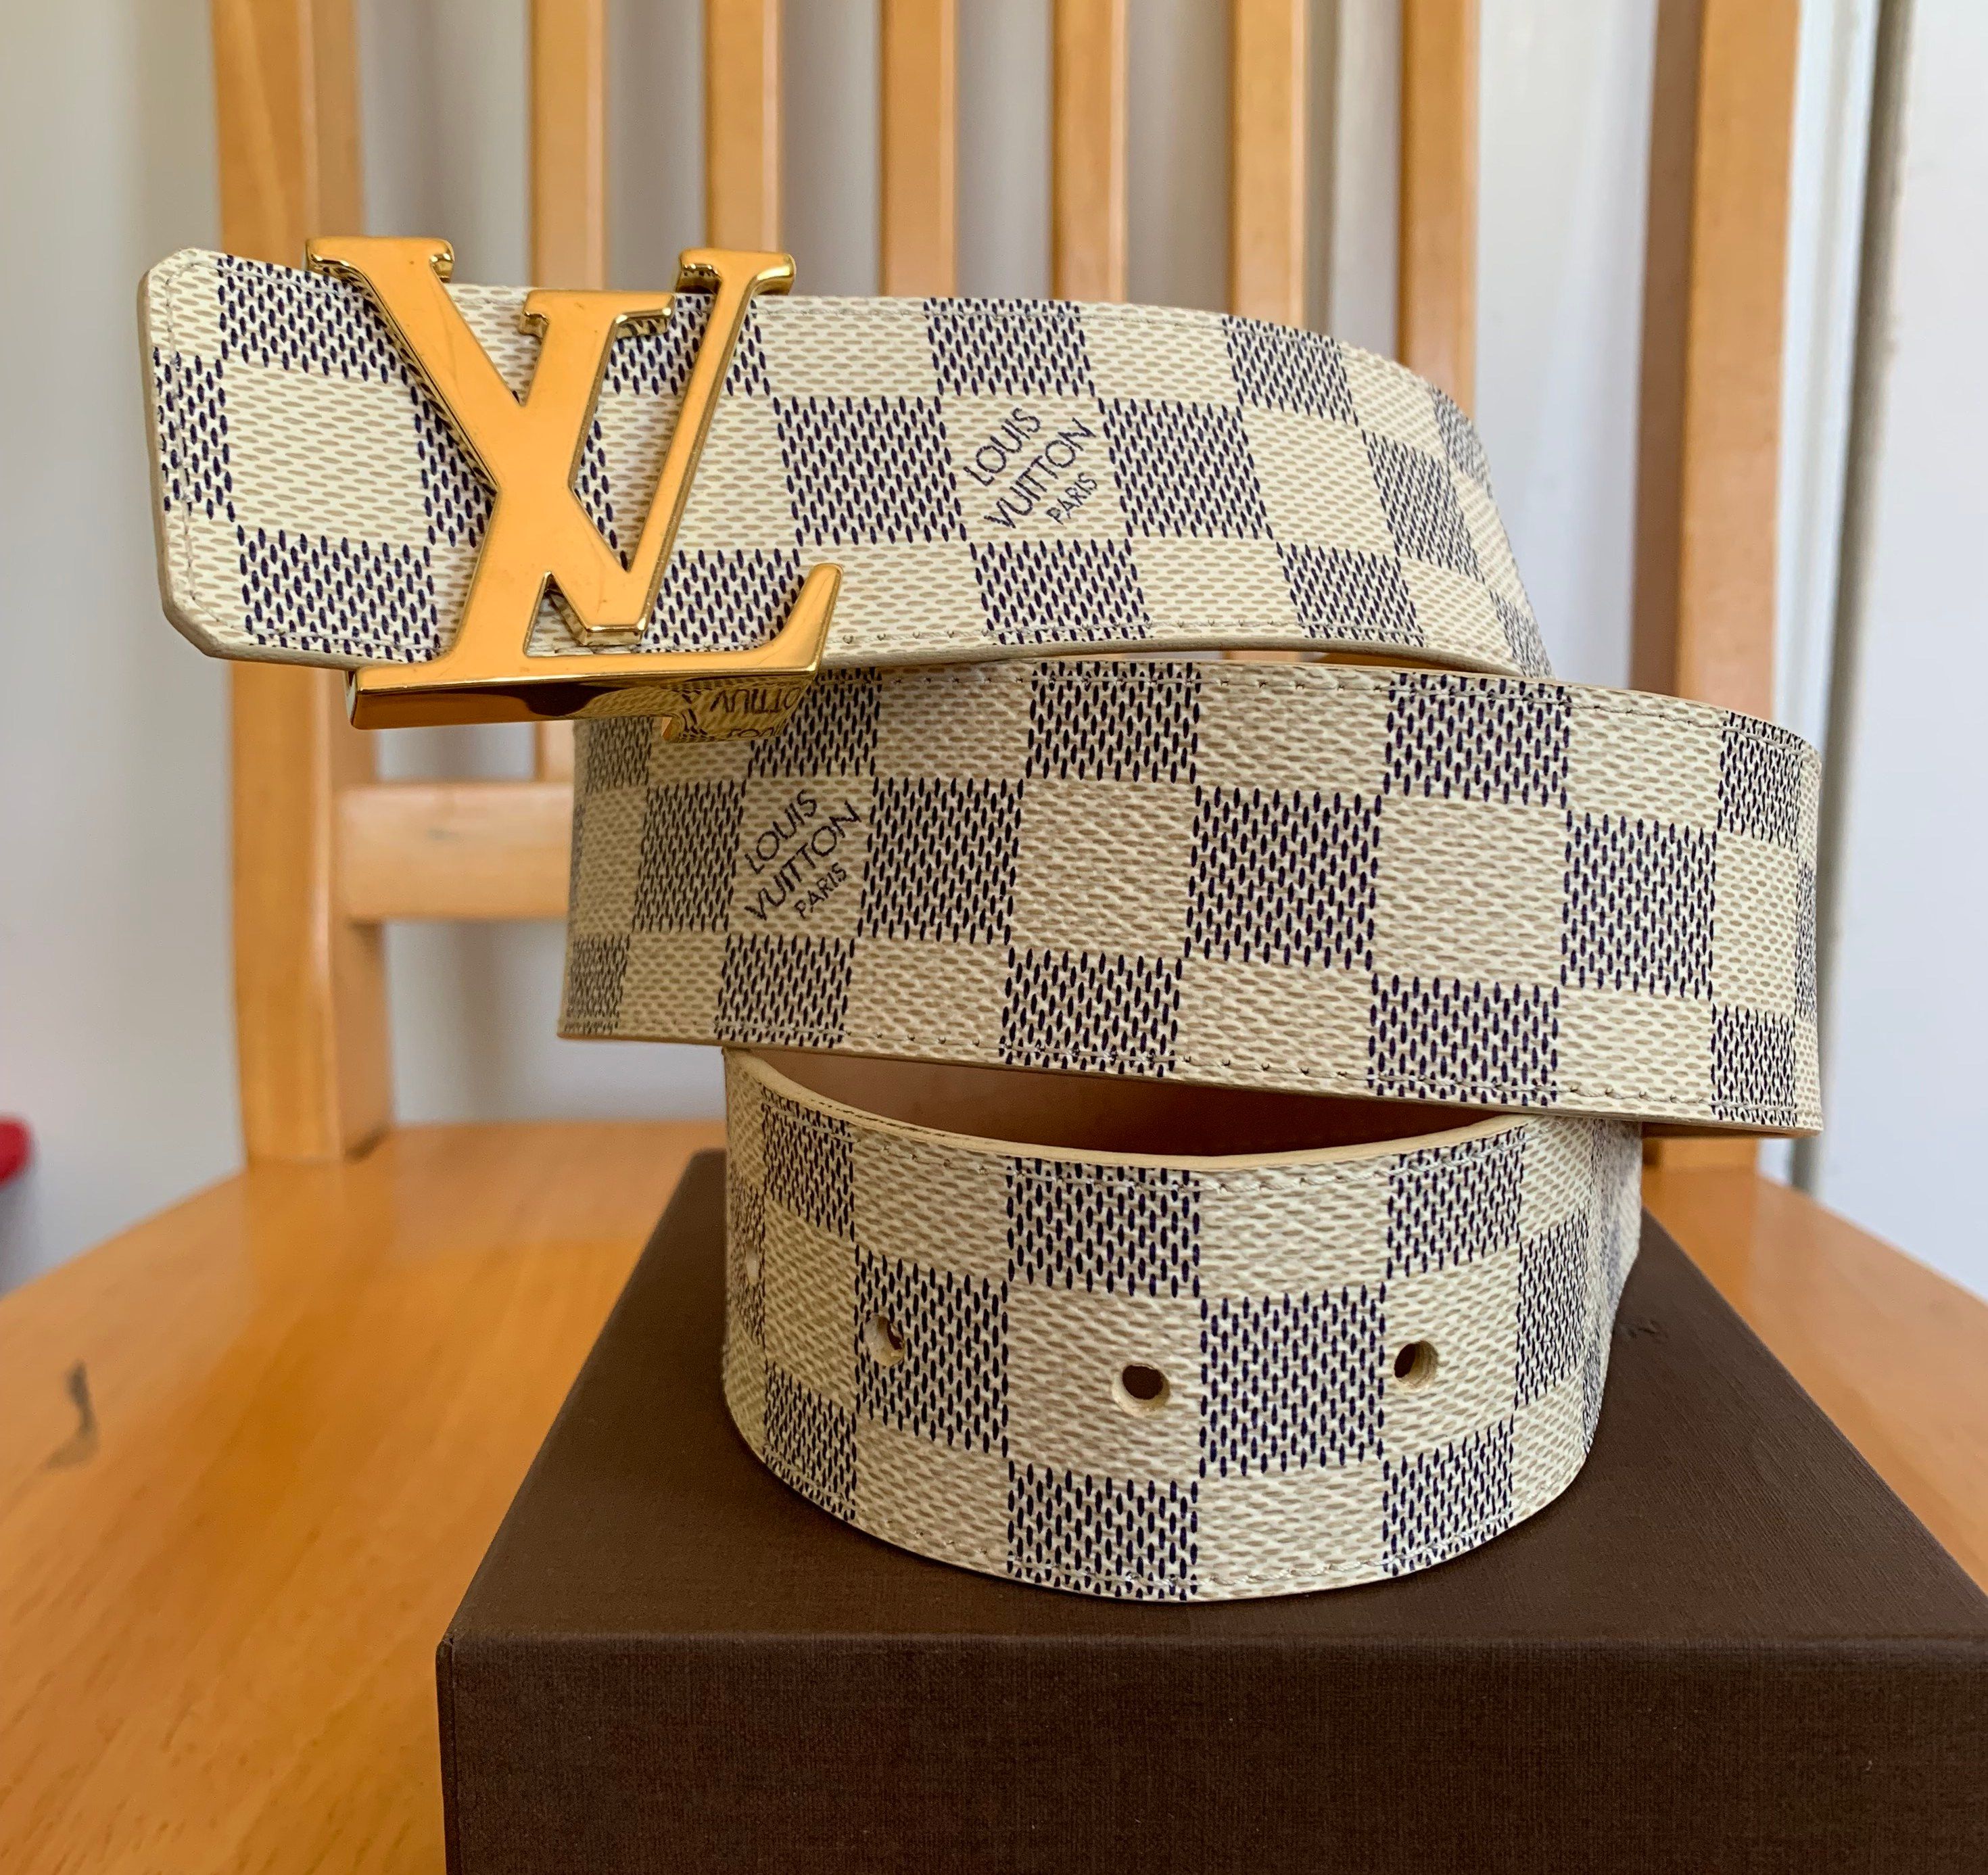 louis vuitton belt white and gold